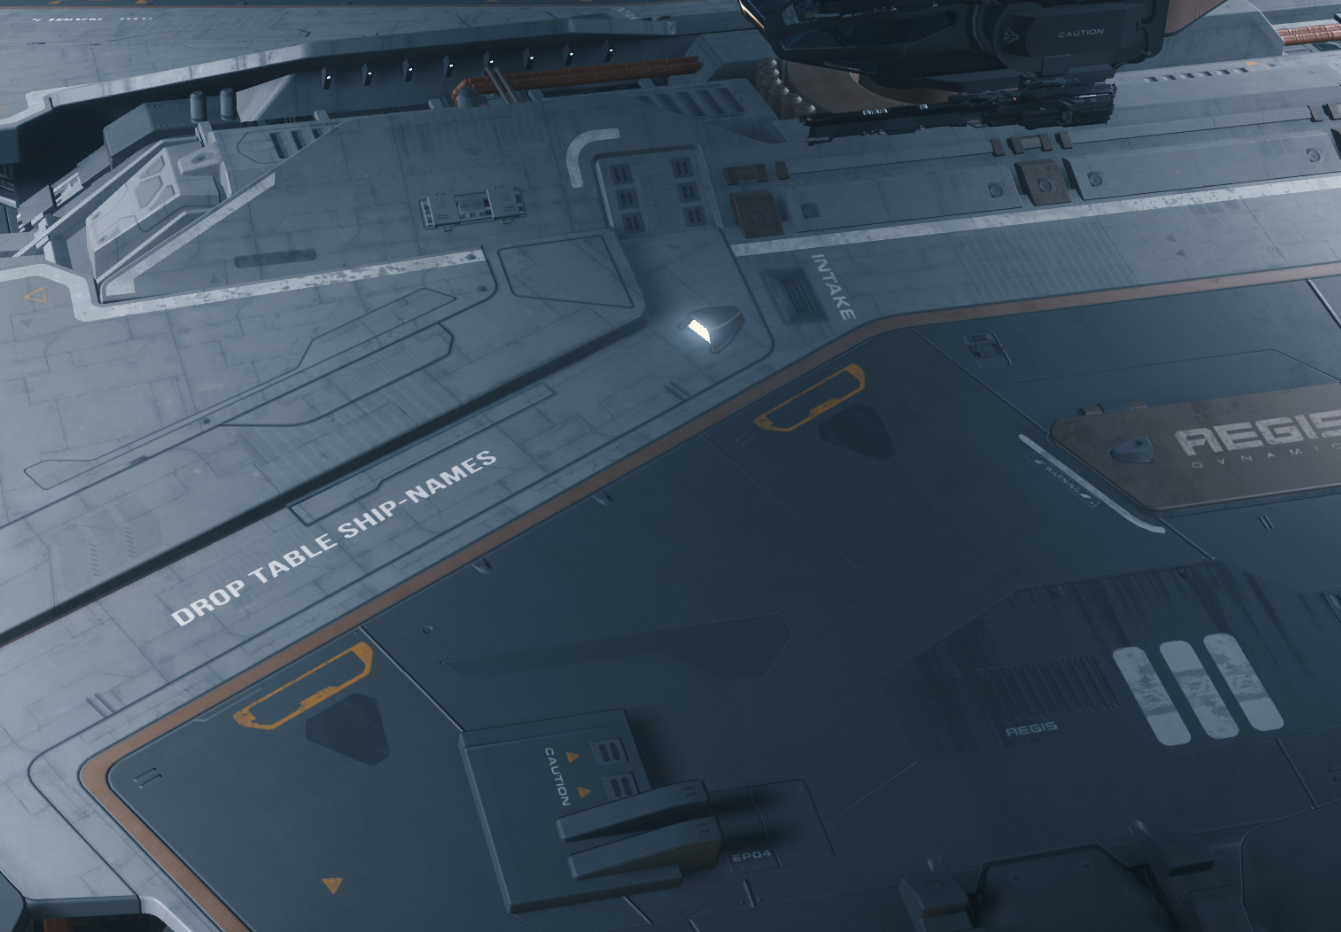 Free Fly April 2023 Instructions for Star Citizen - Start Here